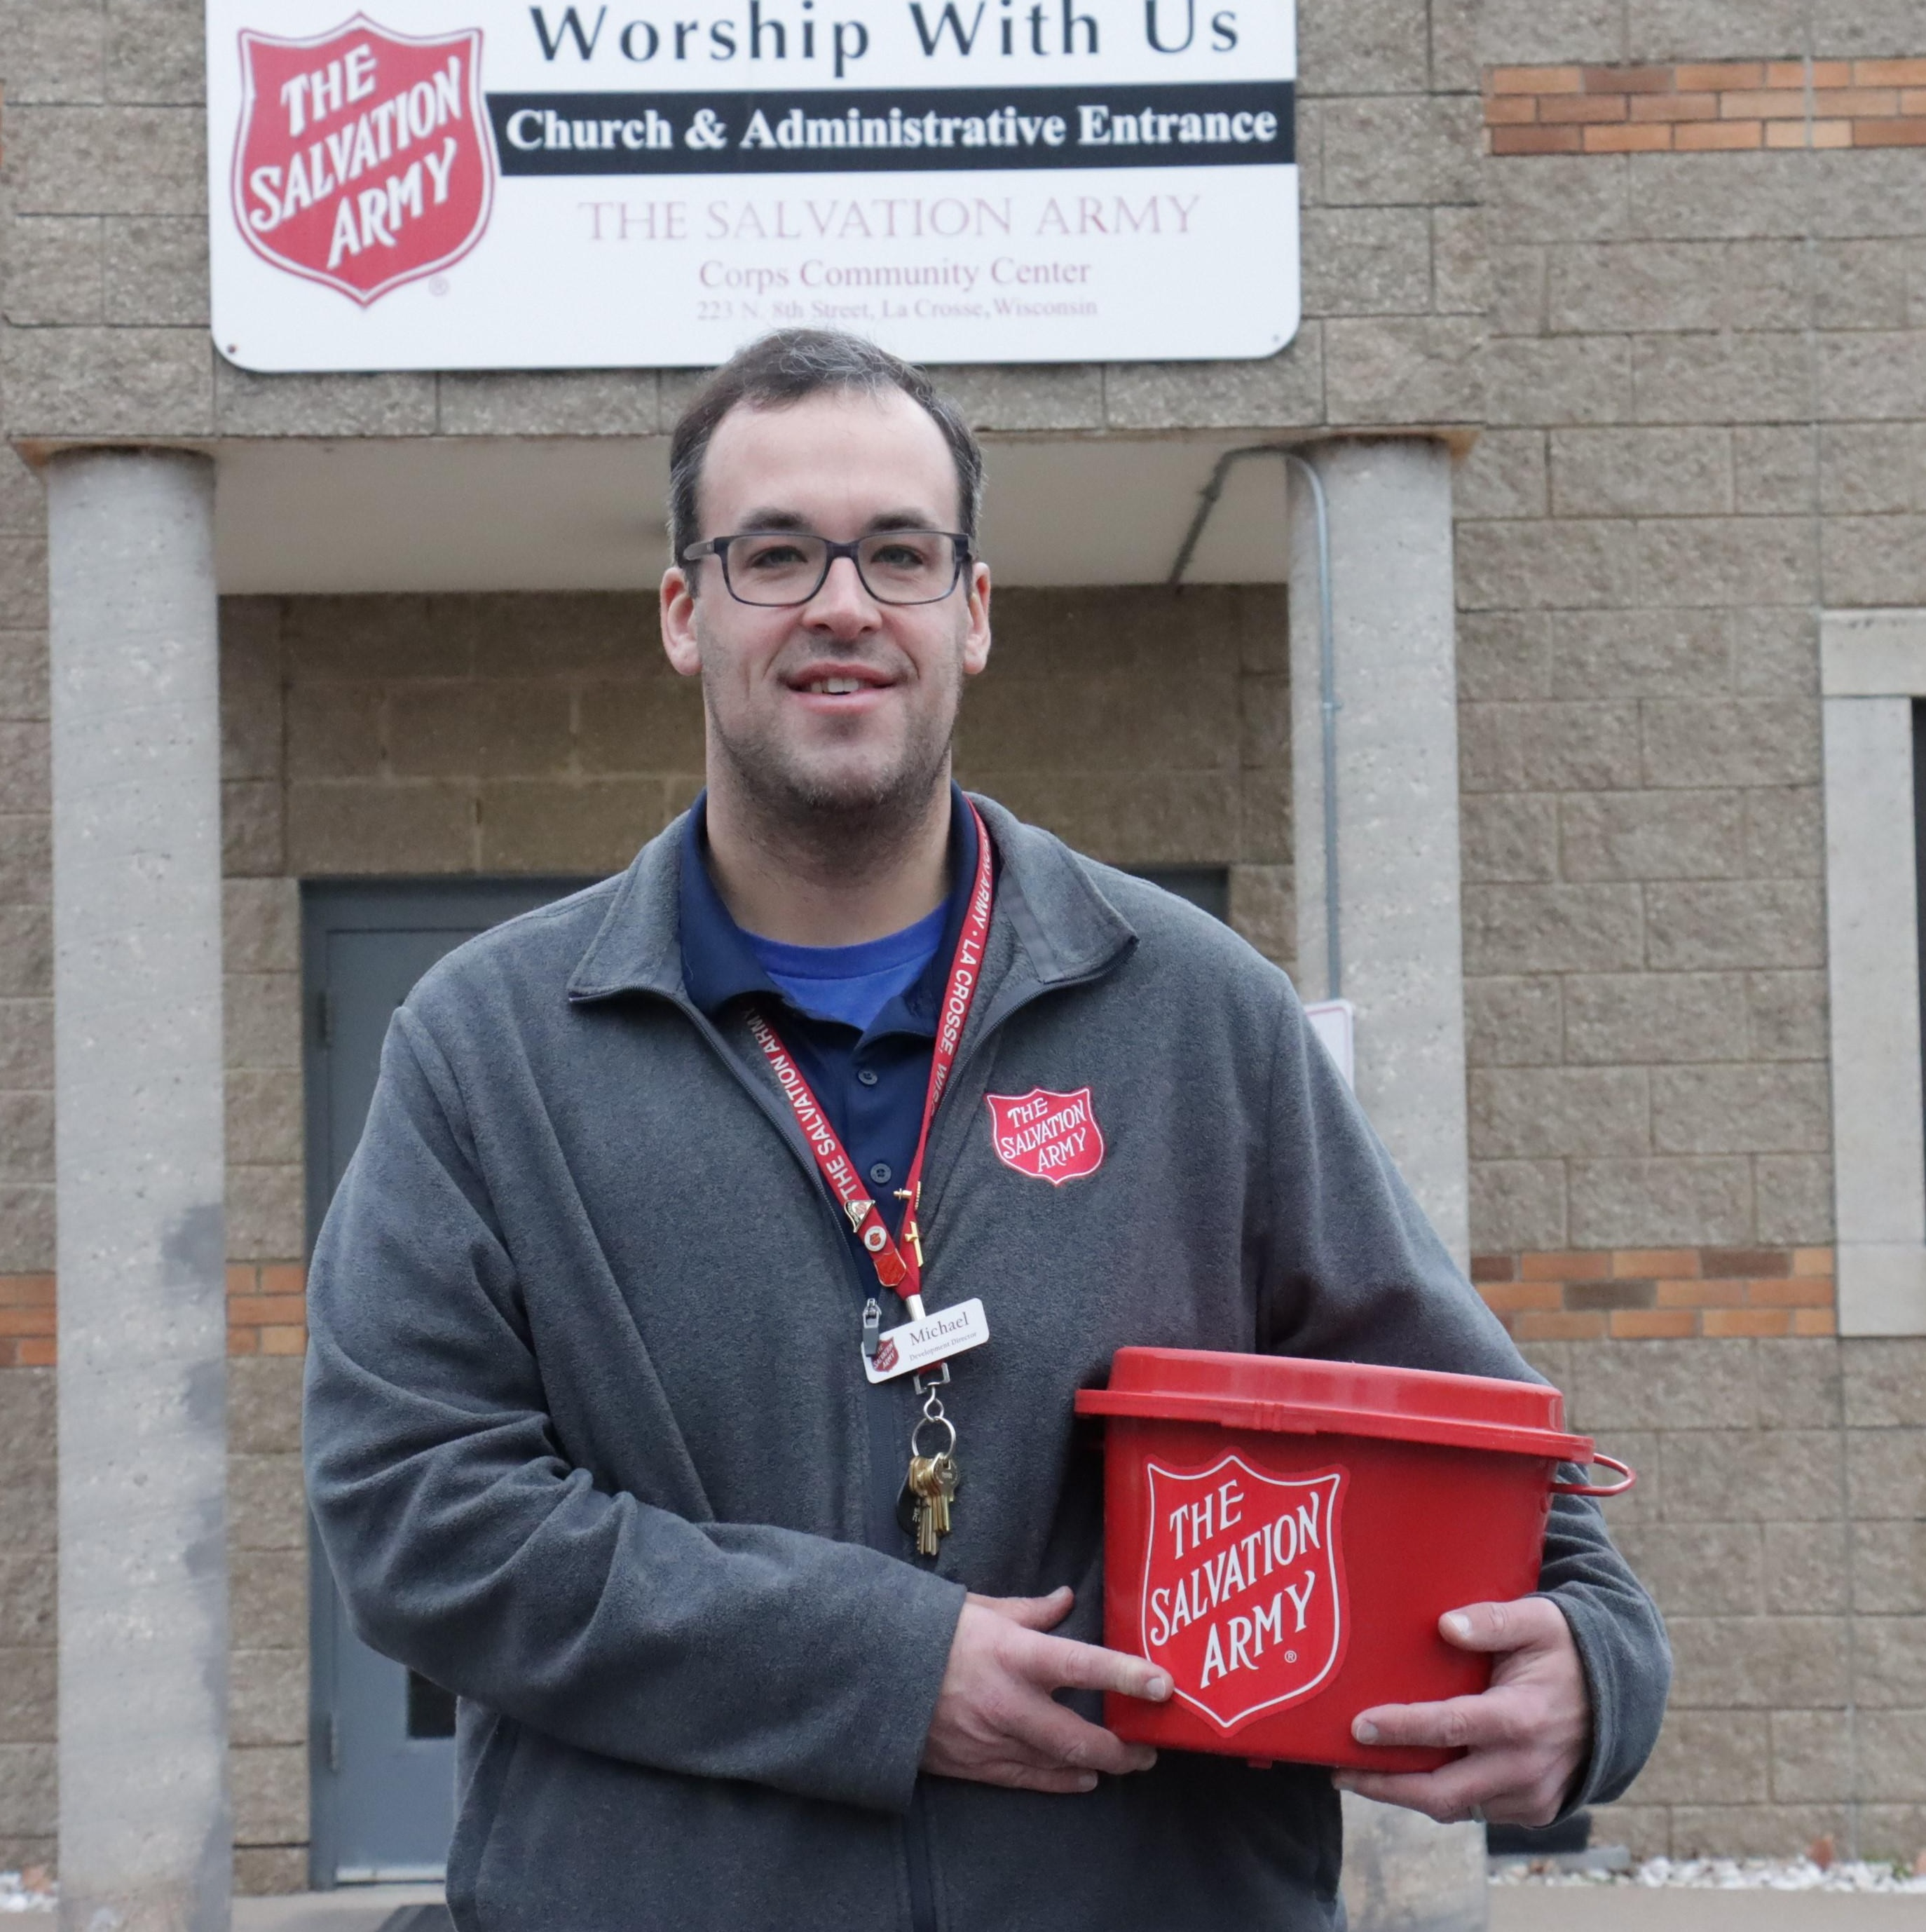 Homelessness in La Crosse with Salvation Army’s Michael Quam